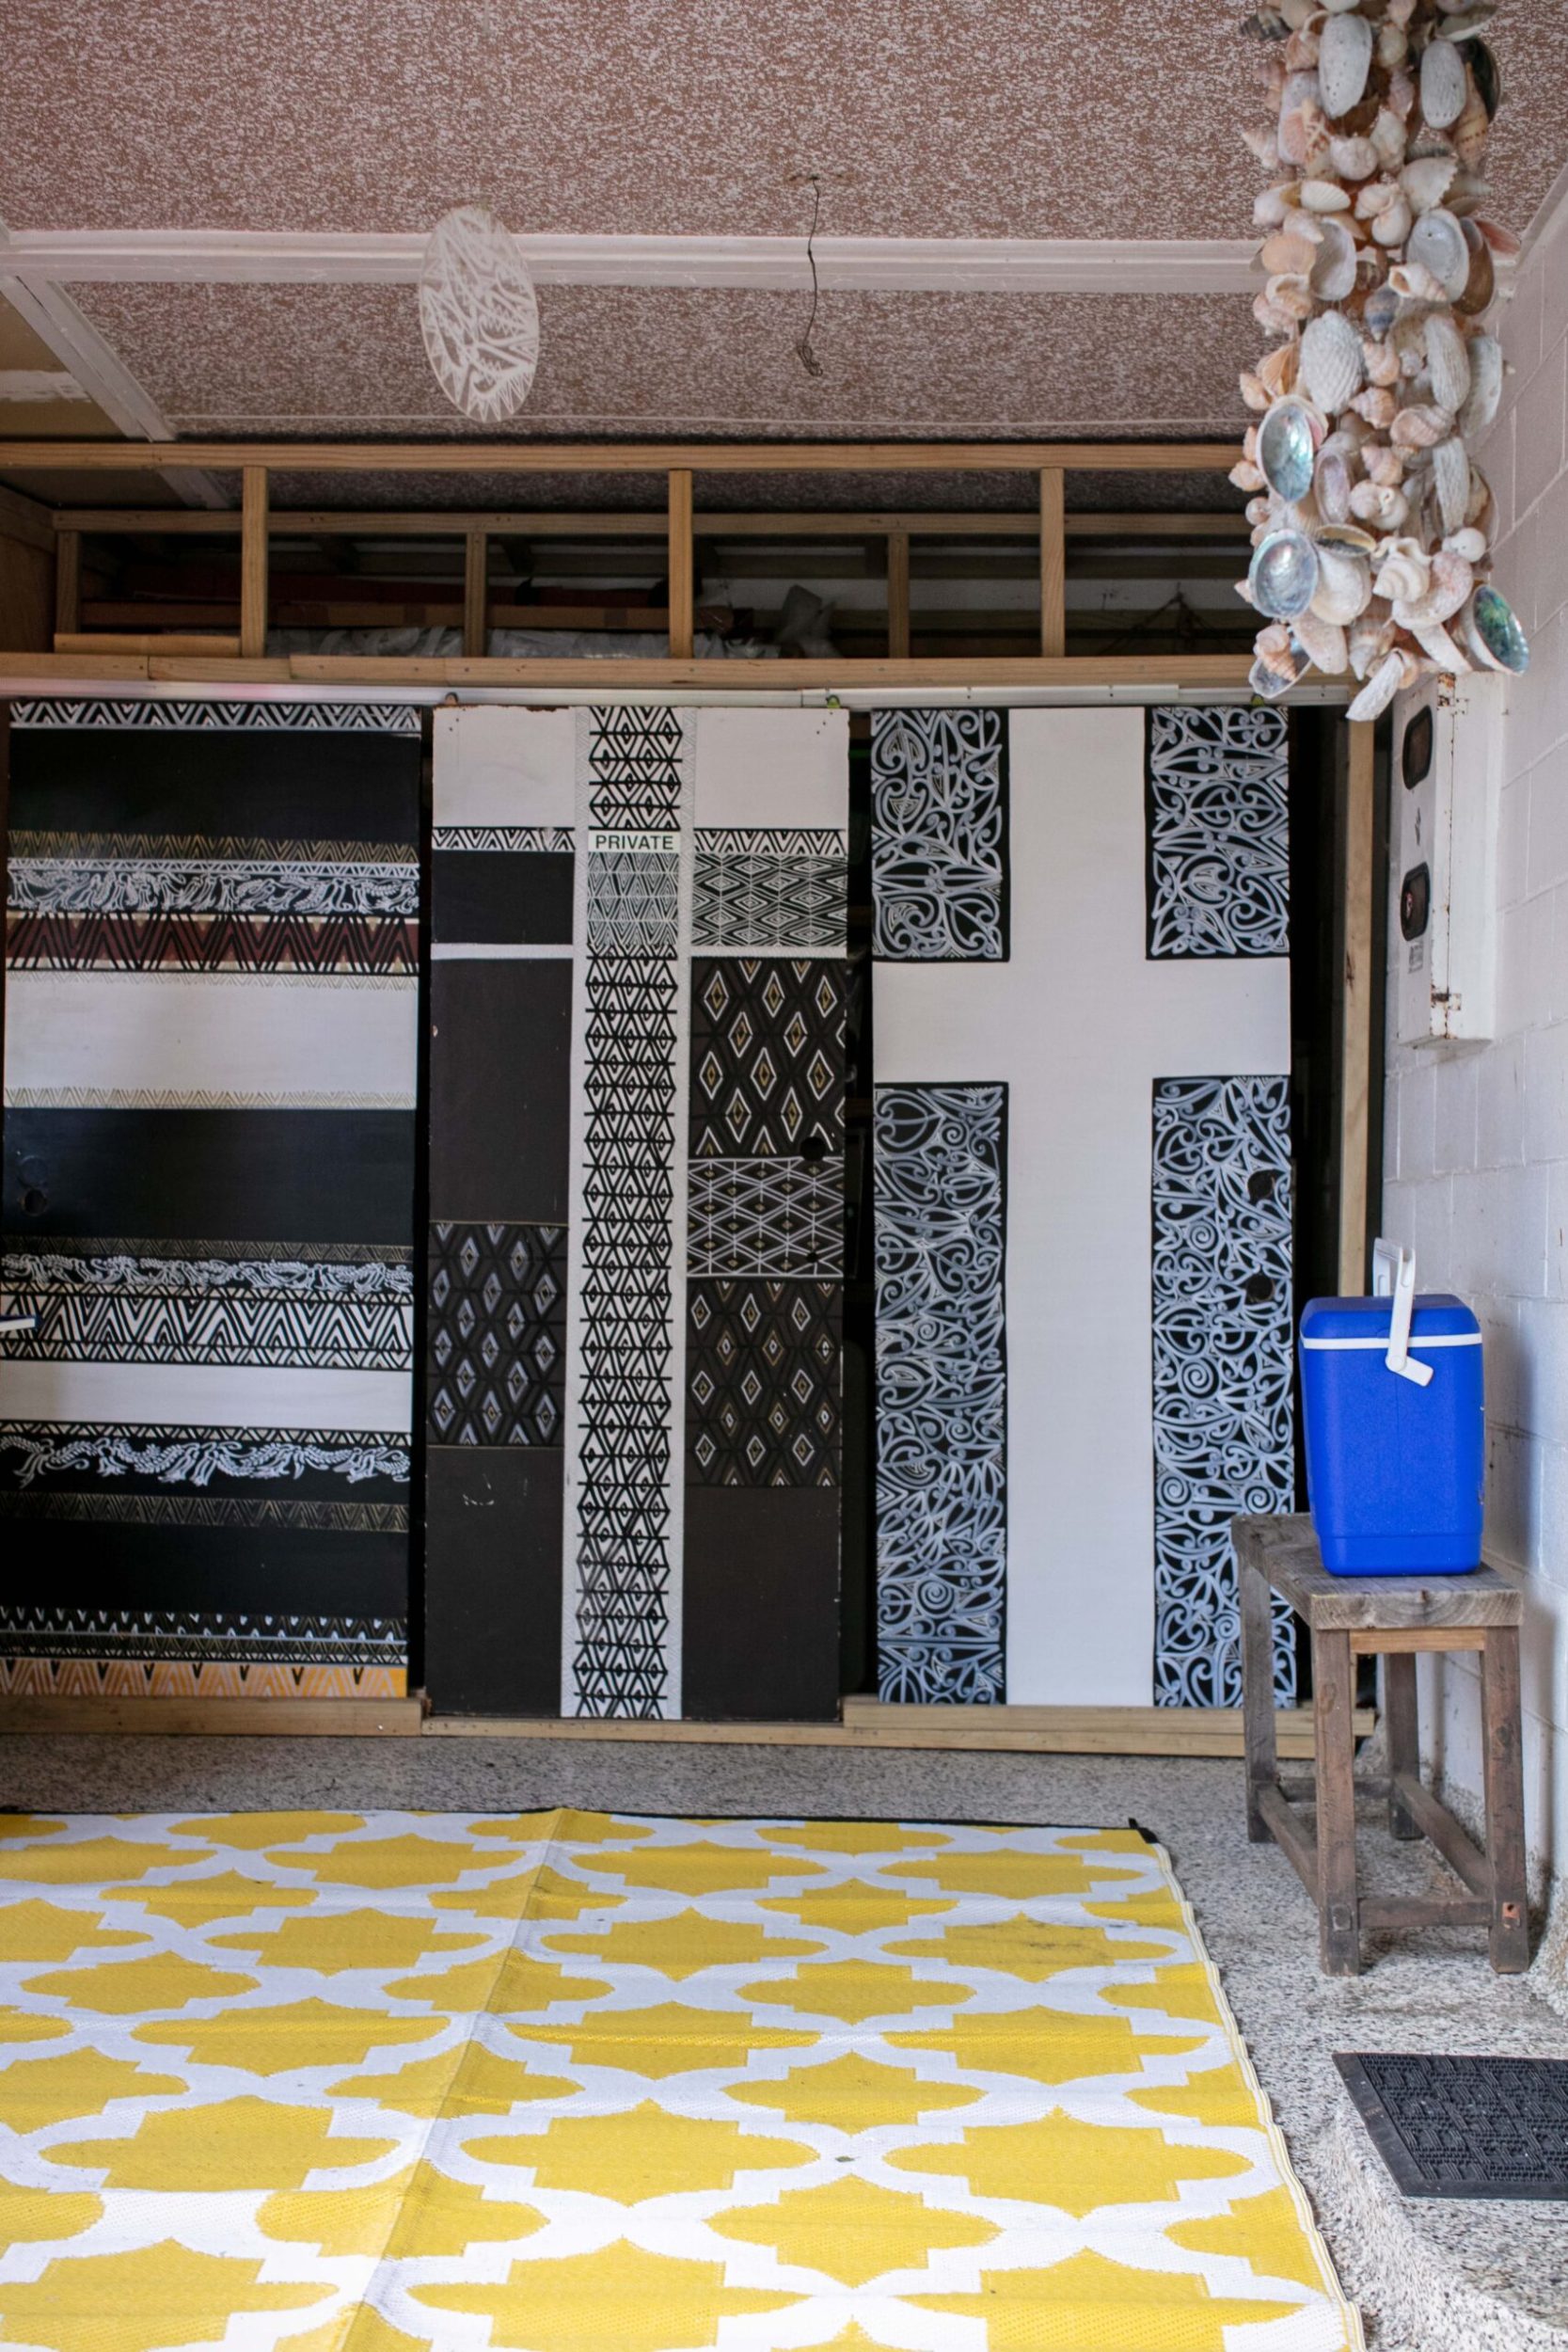 A double door wardrobe painted with black and white Māori art by Tracey Tawhiao